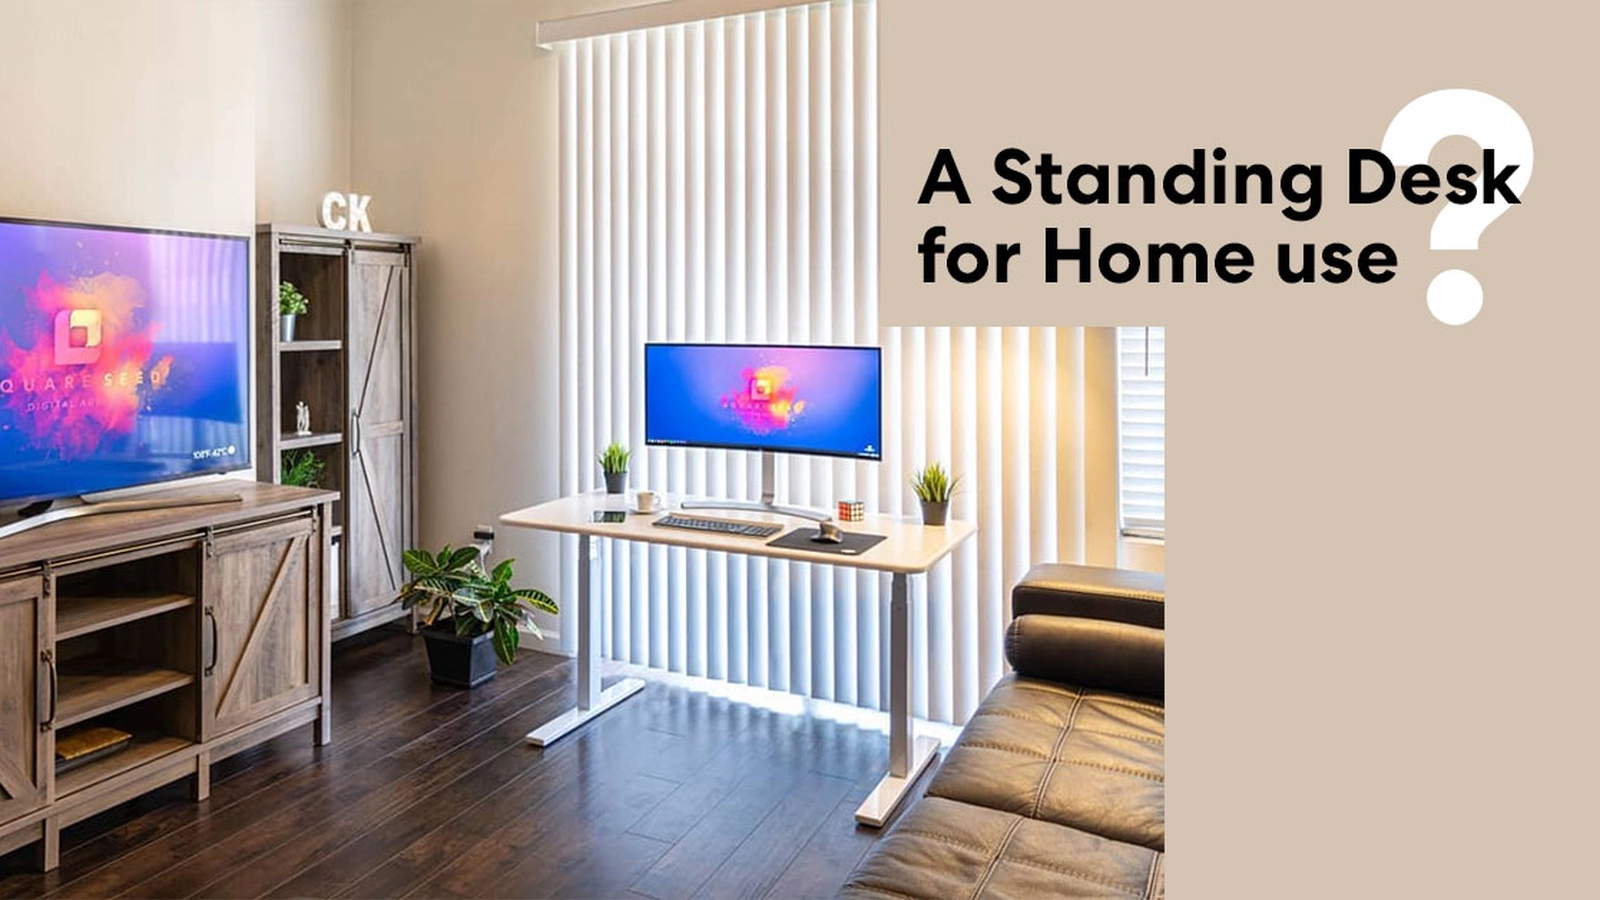 Is a Home Office Standing Desk Right for You?